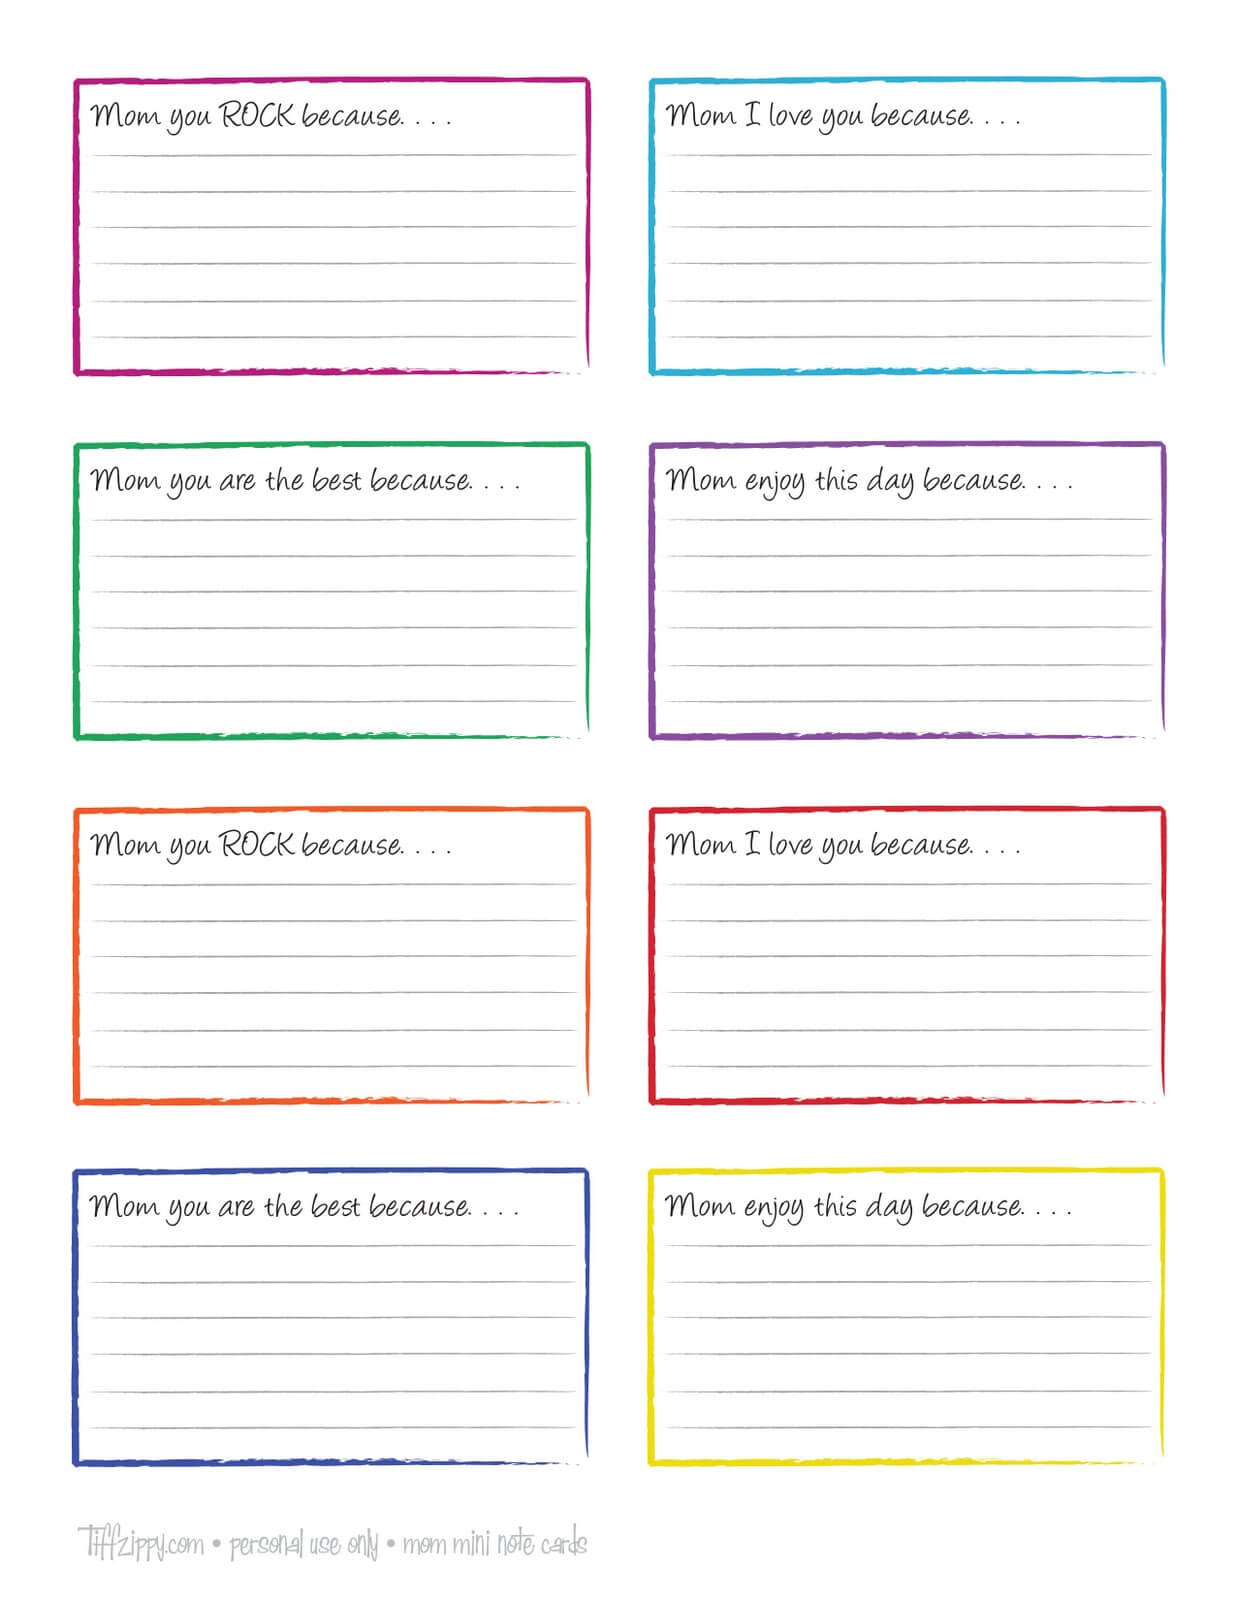 3x5-flash-card-template-calep-midnightpig-co-for-google-docs-note